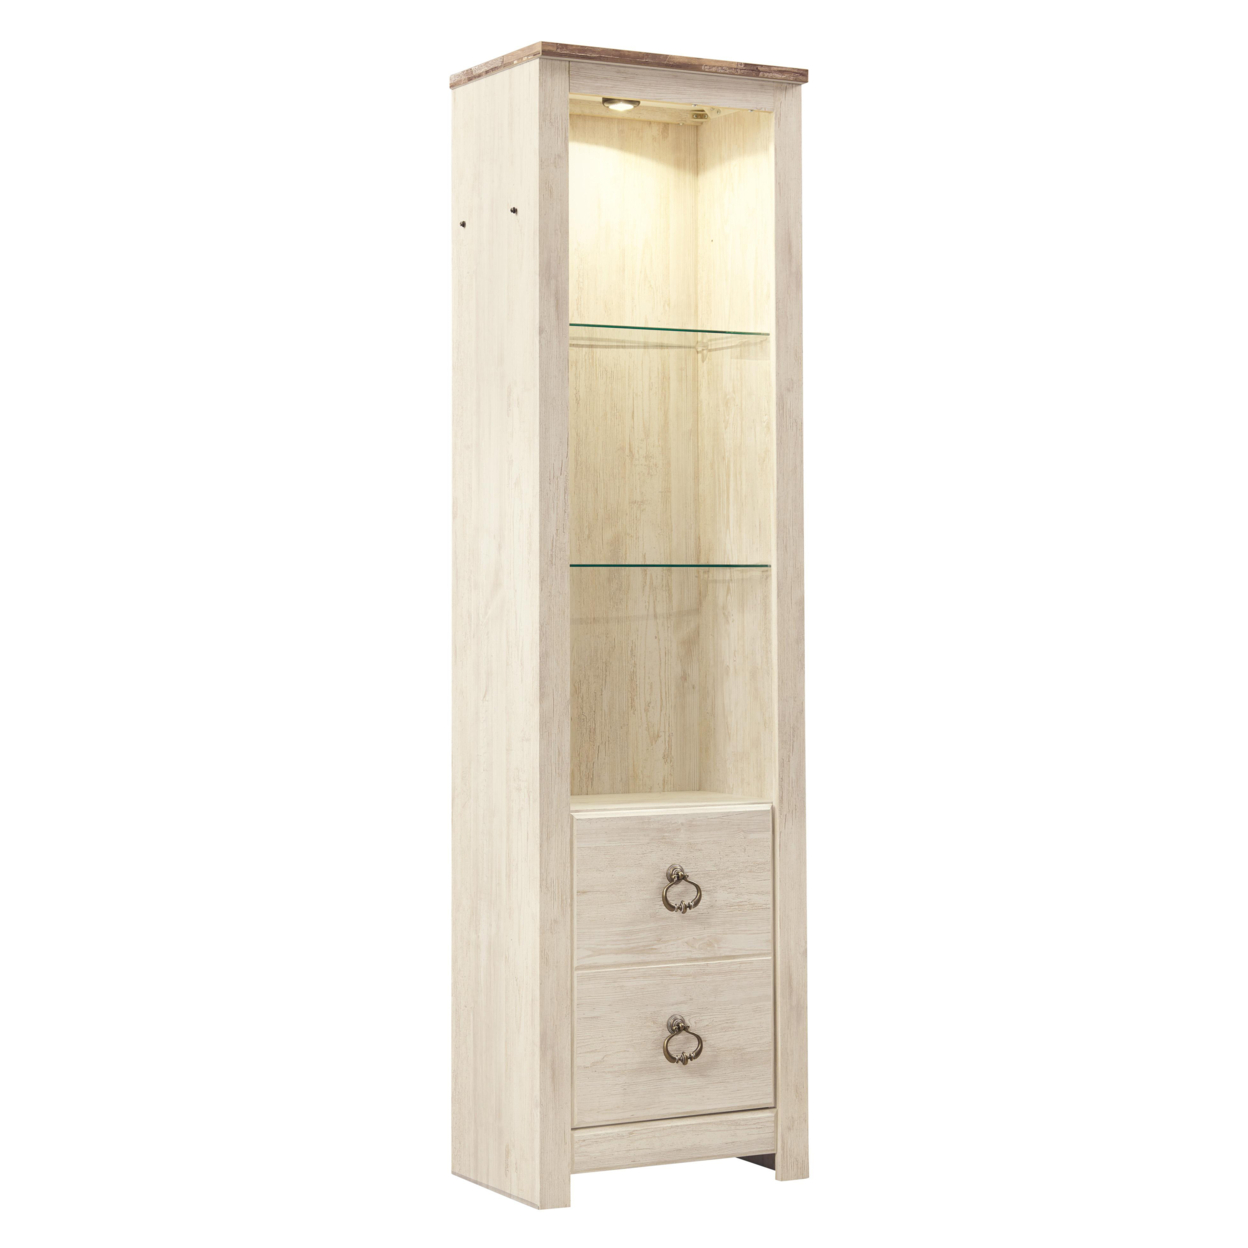 Tall Pier With 1 Door Cabinet And 2 Adjustable Glass Shelves, Antique White- Saltoro Sherpi